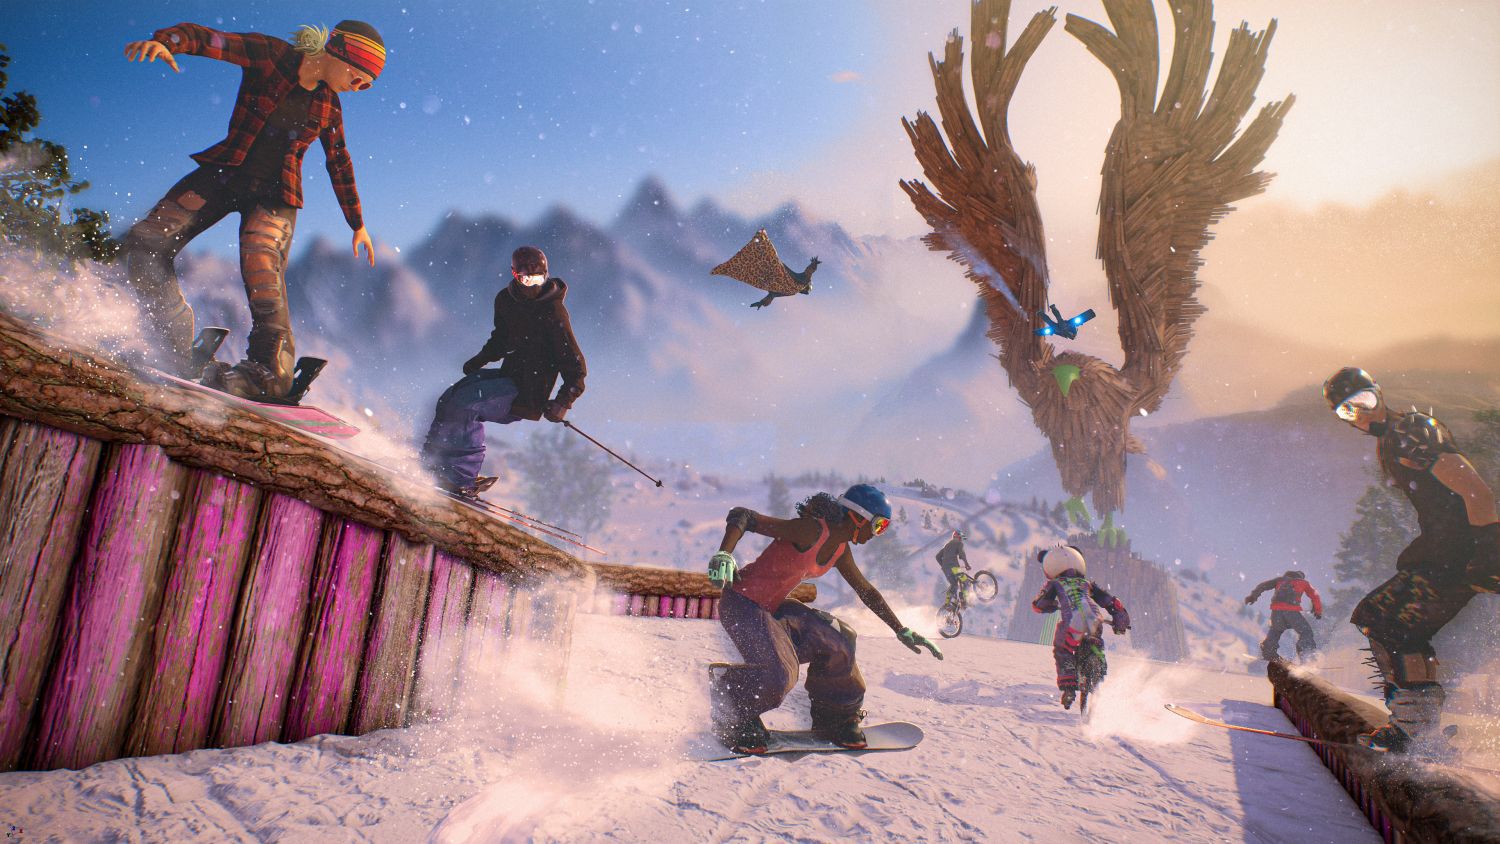 Geek Review: Riders Republic - Hitting the slopes